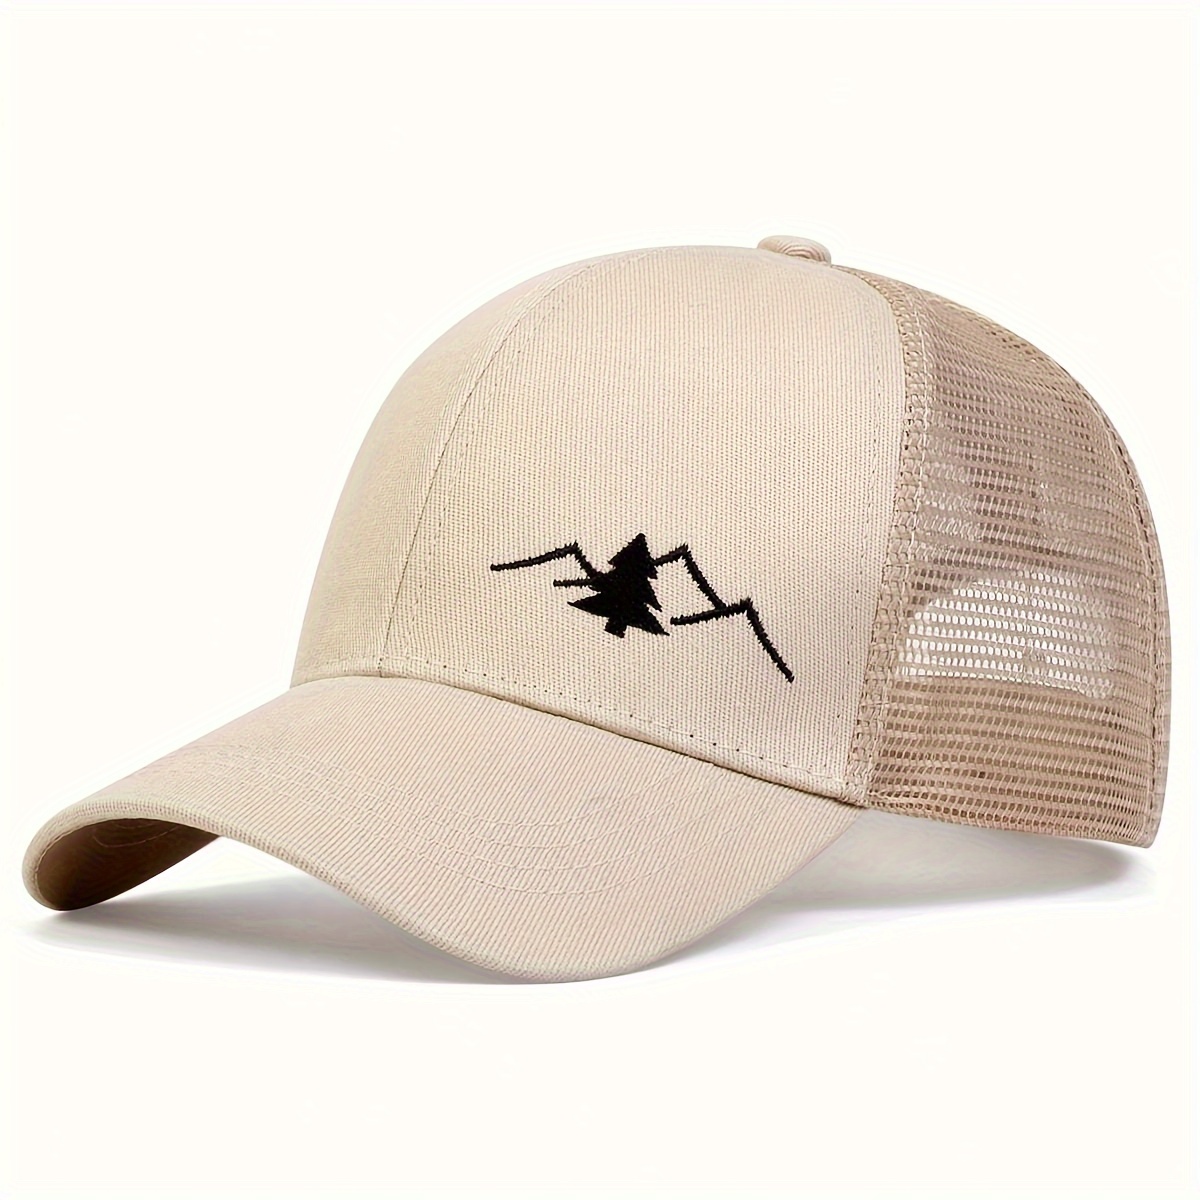 Trucker Hats for Men Fitted Trucker Hats for Men Hats Snapback It's A Good  Day to Drink On A Boat Light Weight Summer Hats Apricot at  Men's  Clothing store